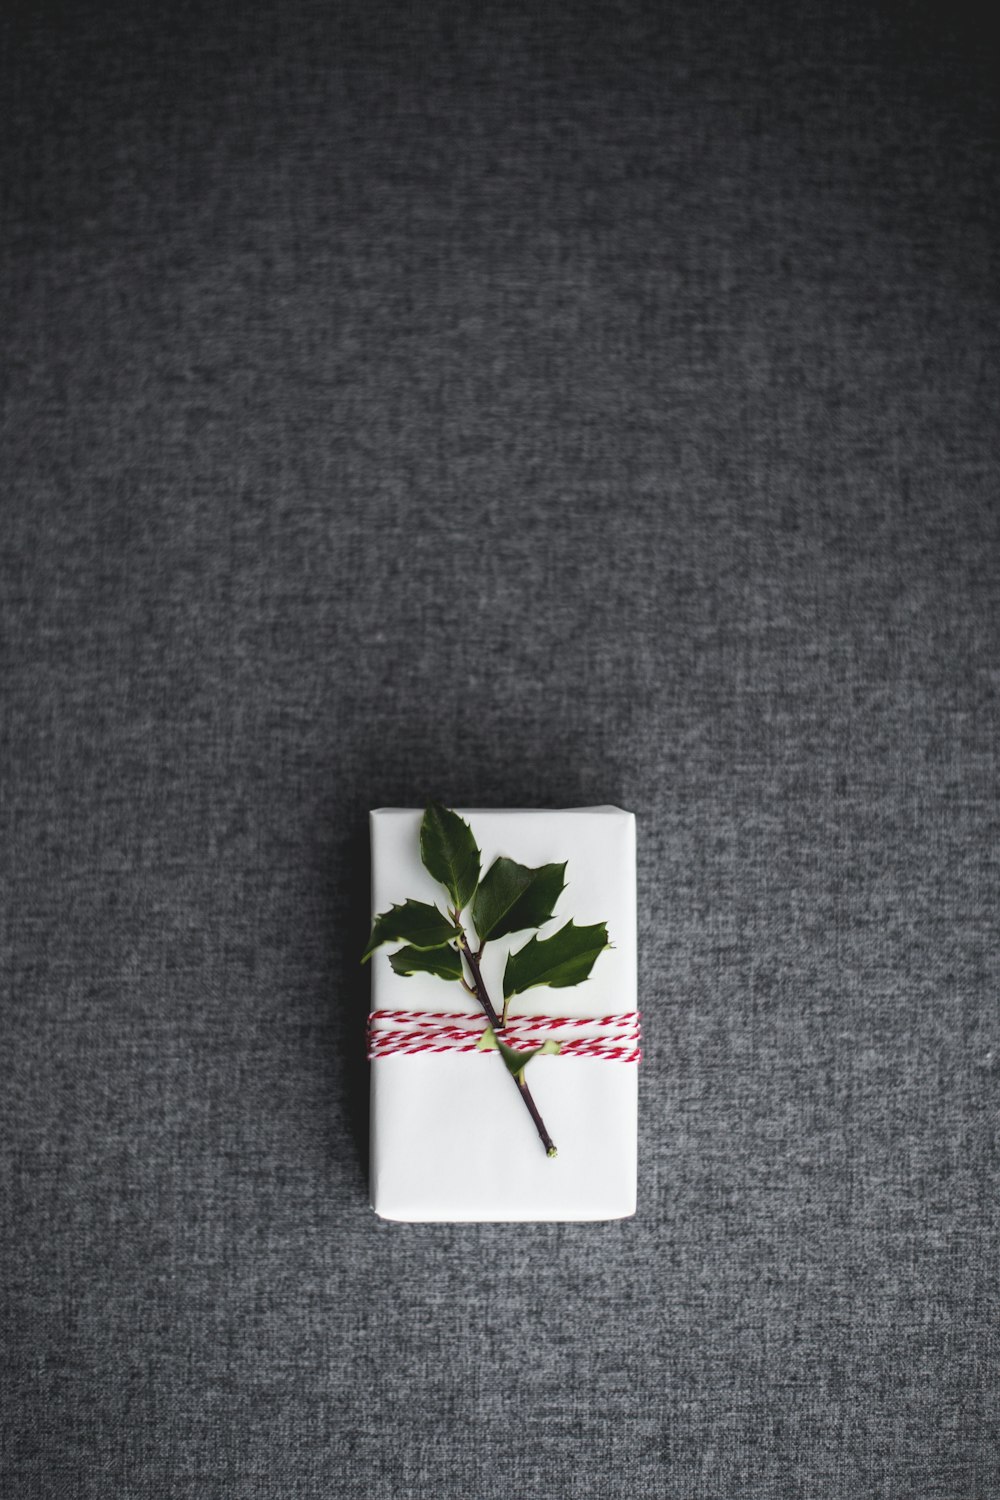 green leaves on white box placed on gray textile